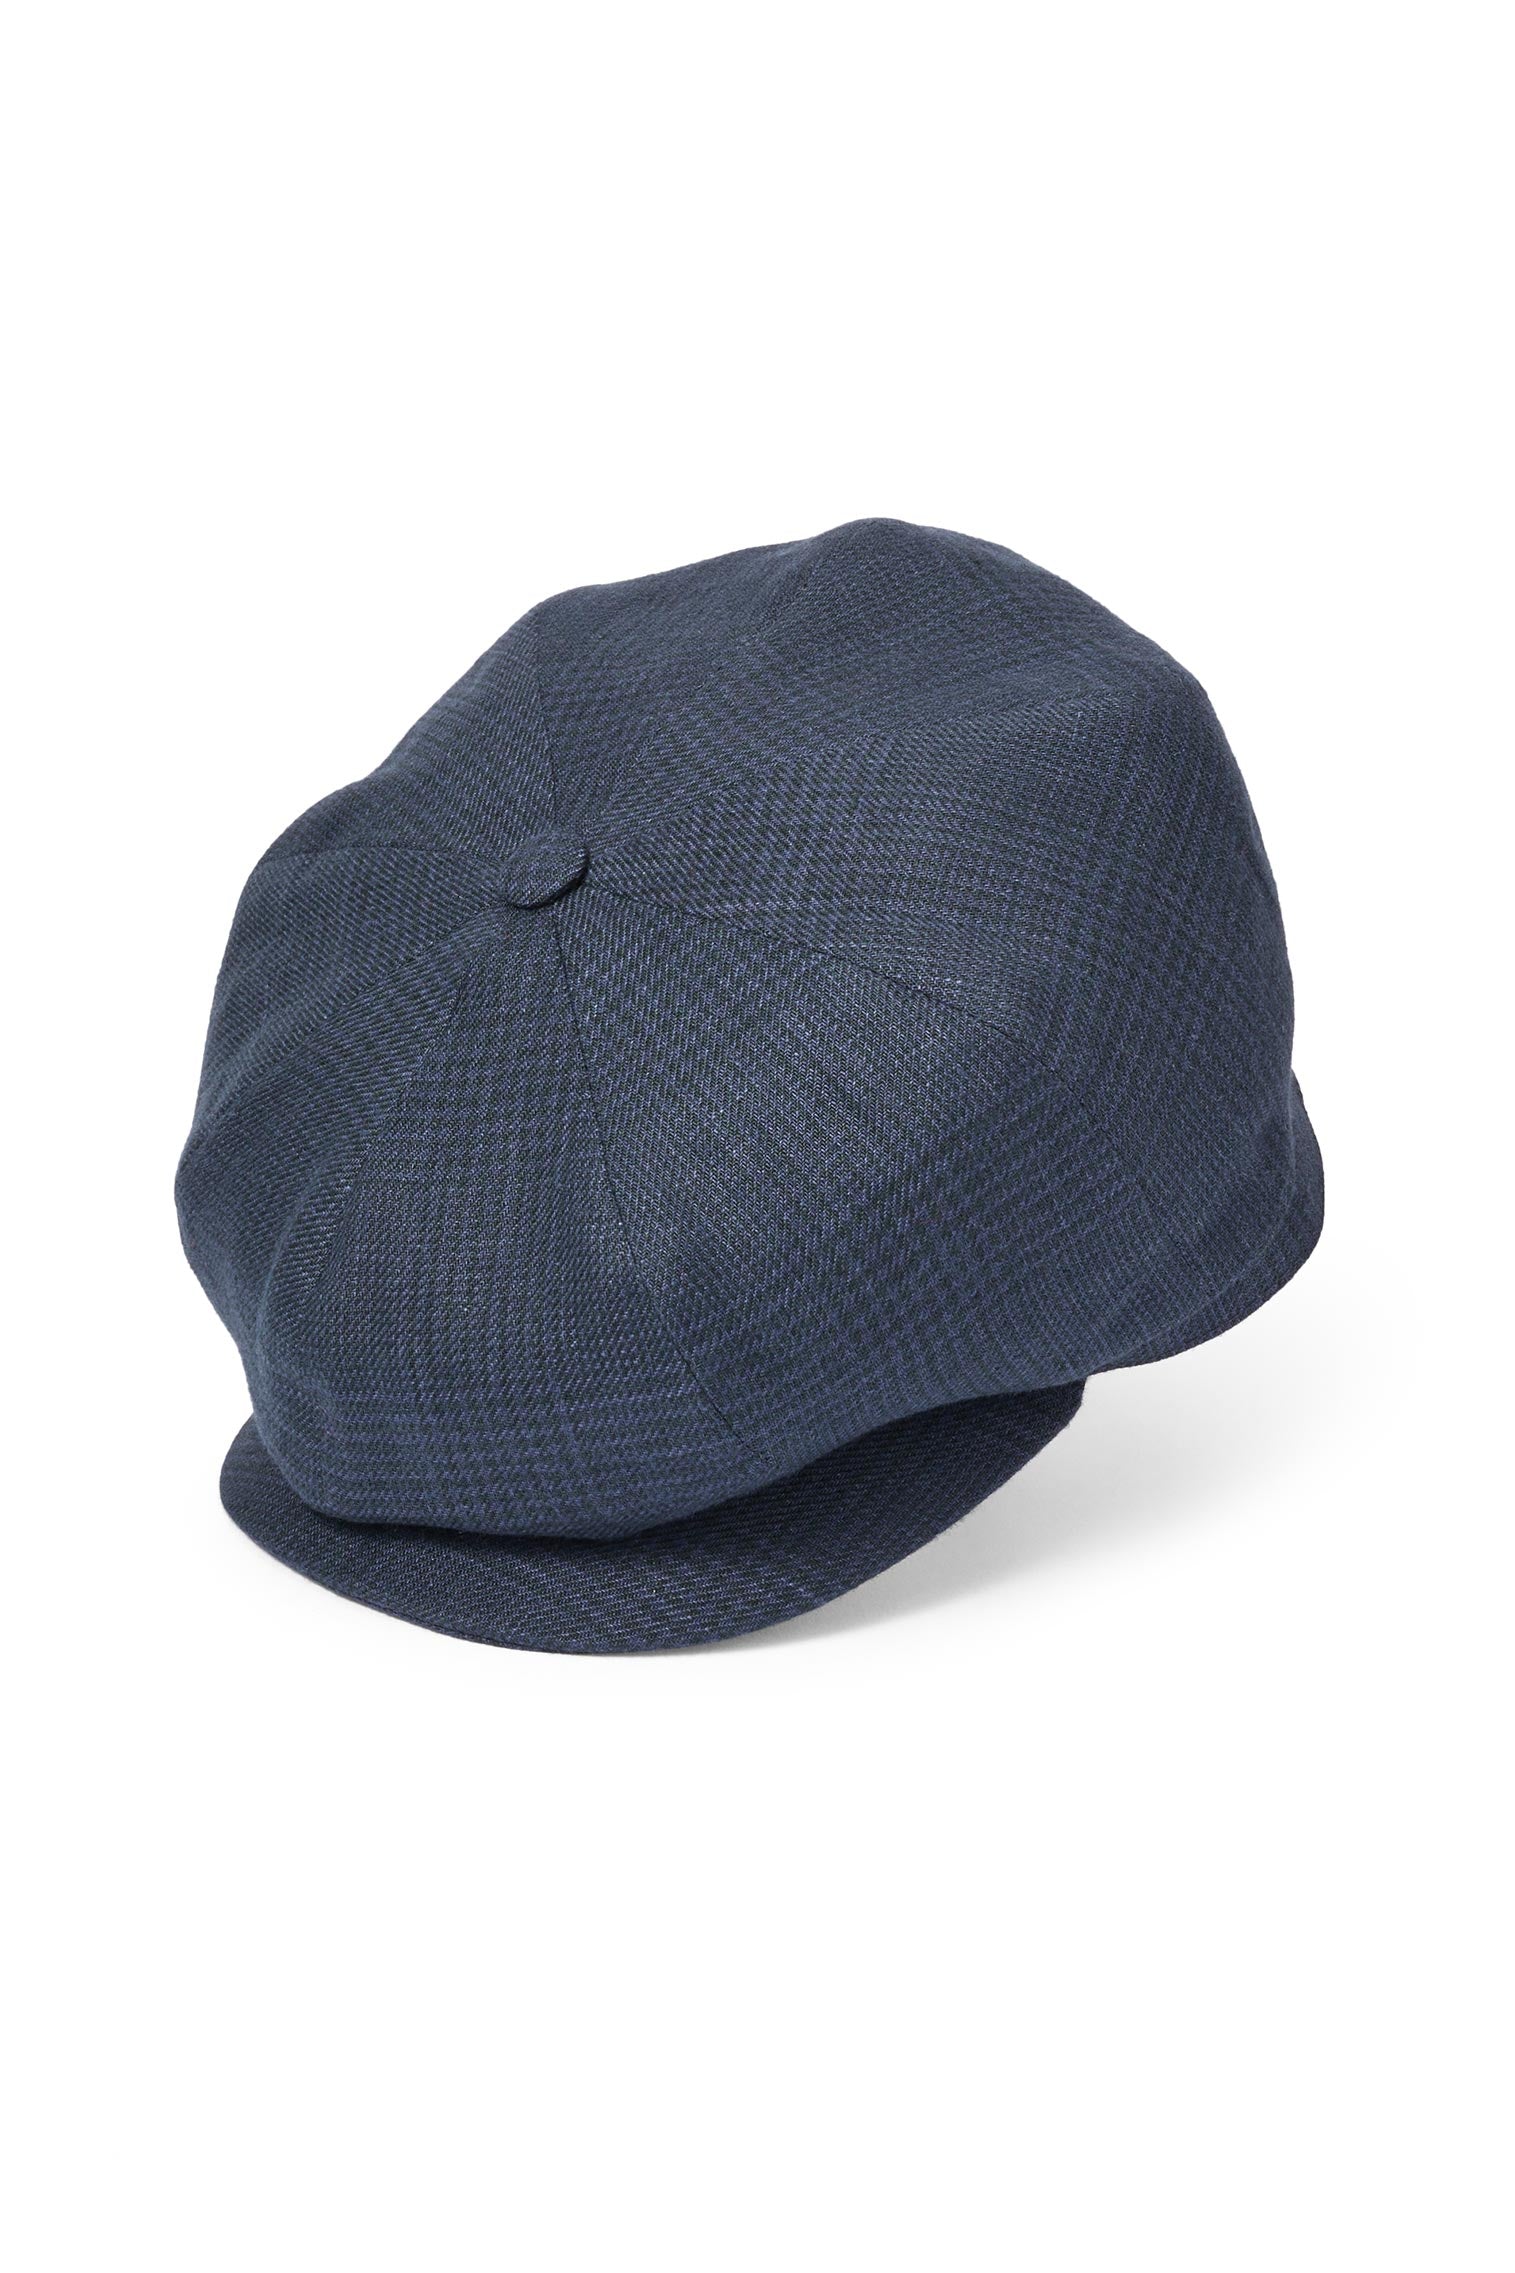 Tremelo Linen Navy Check Bakerboy Cap - Hats for Tall People - Lock & Co. Hatters London UK